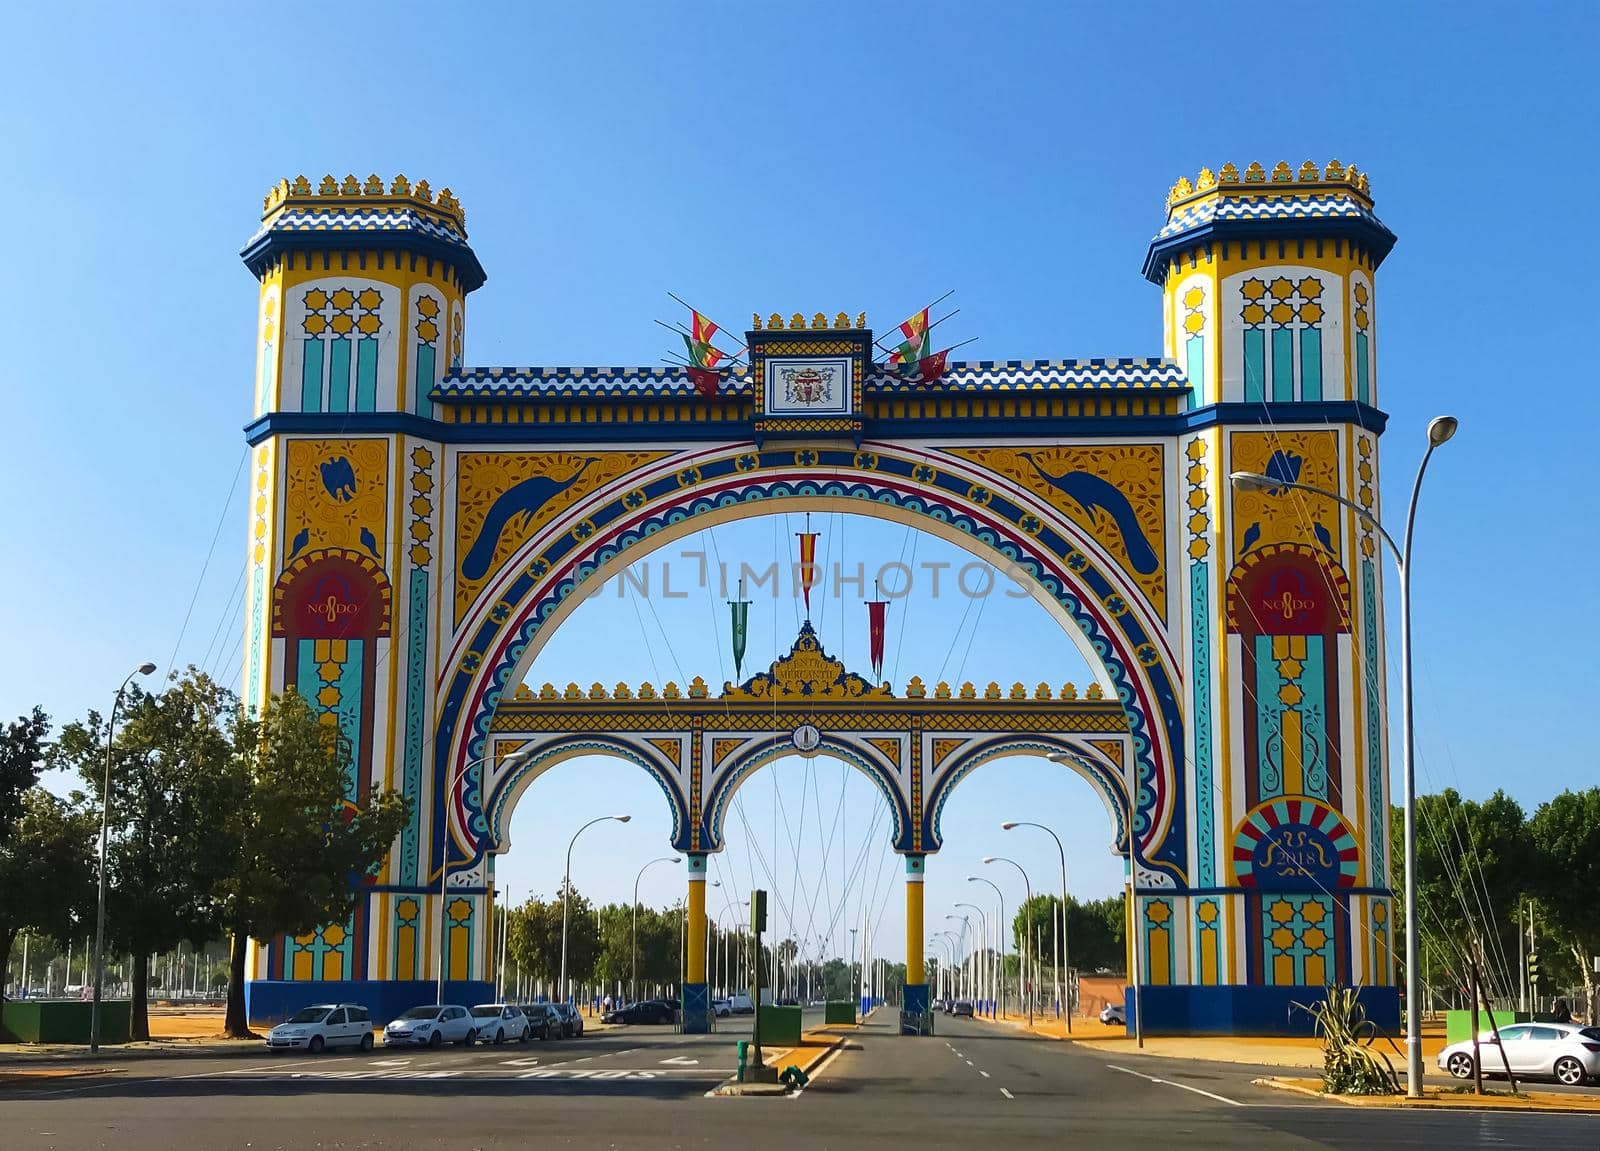 Main entrance of the Fair 2018 in Seville, Spain by Bezdnatm